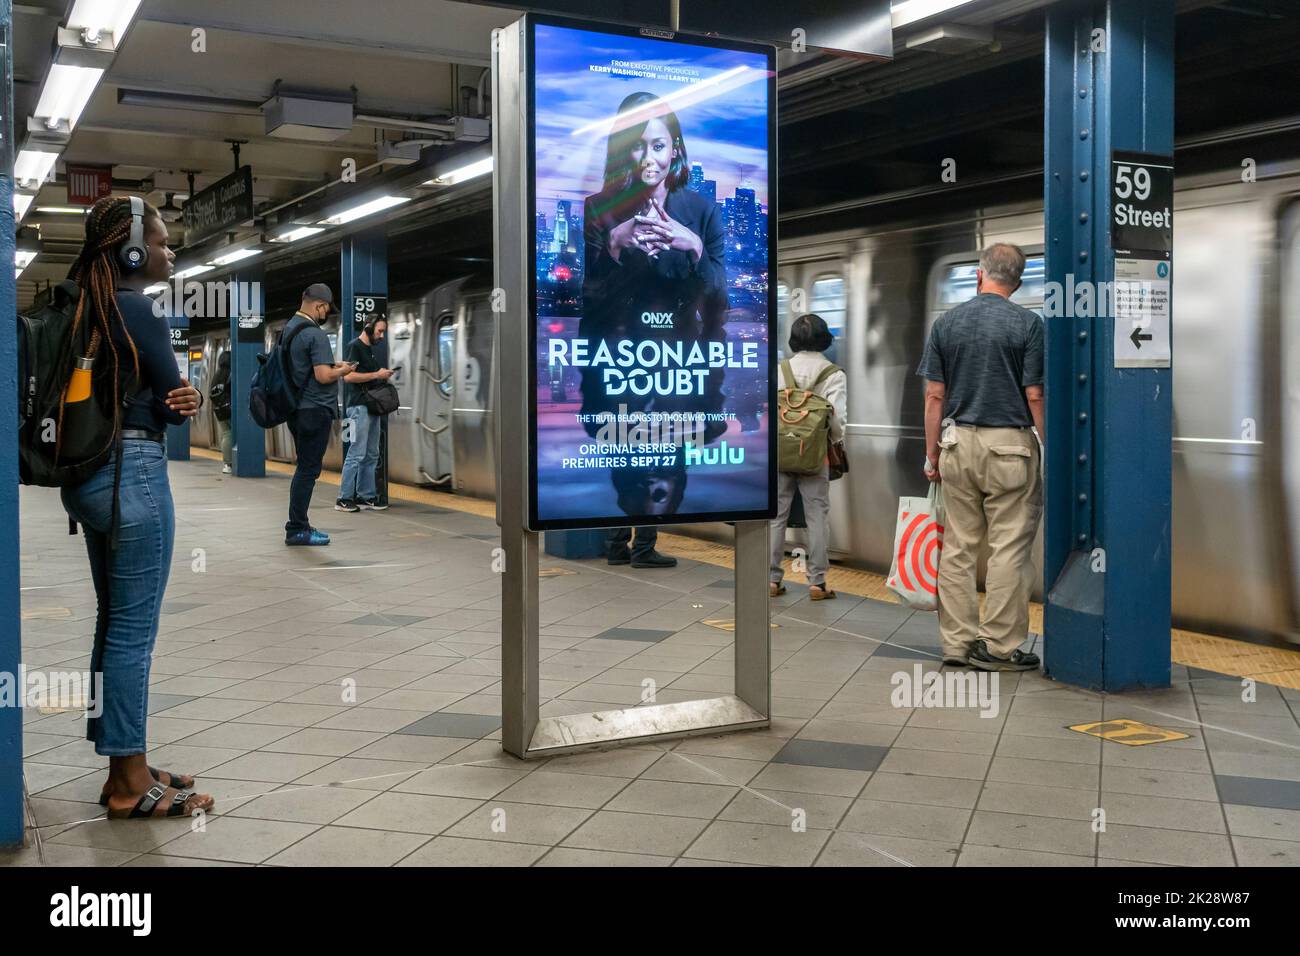 Subway travelers in the Columbus Circle-59th Street station in New York on Wednesday, September 14, 2022. A digital ad for the Hulu program “Reasonable Doubt” is on the platform. (© Richard B. Levine) Stock Photo